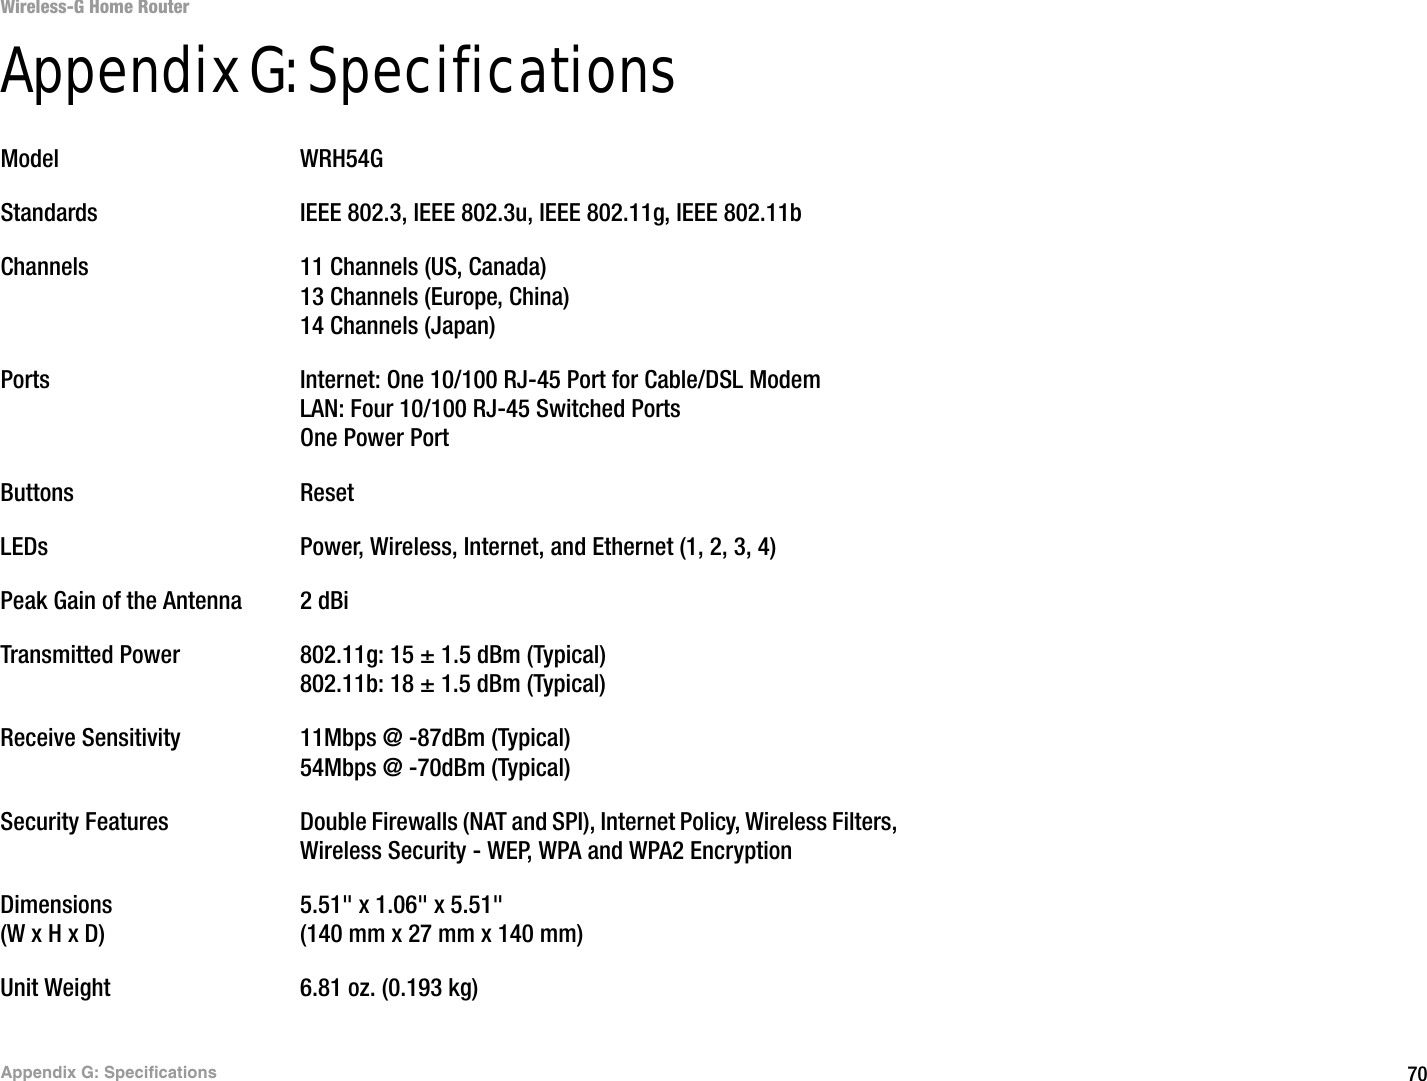 70Appendix G: SpecificationsWireless-G Home RouterAppendix G: SpecificationsModel WRH54GStandards IEEE 802.3, IEEE 802.3u, IEEE 802.11g, IEEE 802.11bChannels 11 Channels (US, Canada)13 Channels (Europe, China)14 Channels (Japan)Ports Internet: One 10/100 RJ-45 Port for Cable/DSL ModemLAN: Four 10/100 RJ-45 Switched PortsOne Power PortButtons ResetLEDs Power, Wireless, Internet, and Ethernet (1, 2, 3, 4)Peak Gain of the Antenna 2 dBiTransmitted Power 802.11g: 15 ± 1.5 dBm (Typical)802.11b: 18 ± 1.5 dBm (Typical)Receive Sensitivity 11Mbps @ -87dBm (Typical)54Mbps @ -70dBm (Typical)Security Features Double Firewalls (NAT and SPI), Internet Policy, Wireless Filters, Wireless Security - WEP, WPA and WPA2 EncryptionDimensions 5.51&quot; x 1.06&quot; x 5.51&quot;(W x H x D) (140 mm x 27 mm x 140 mm)Unit Weight 6.81 oz. (0.193 kg)